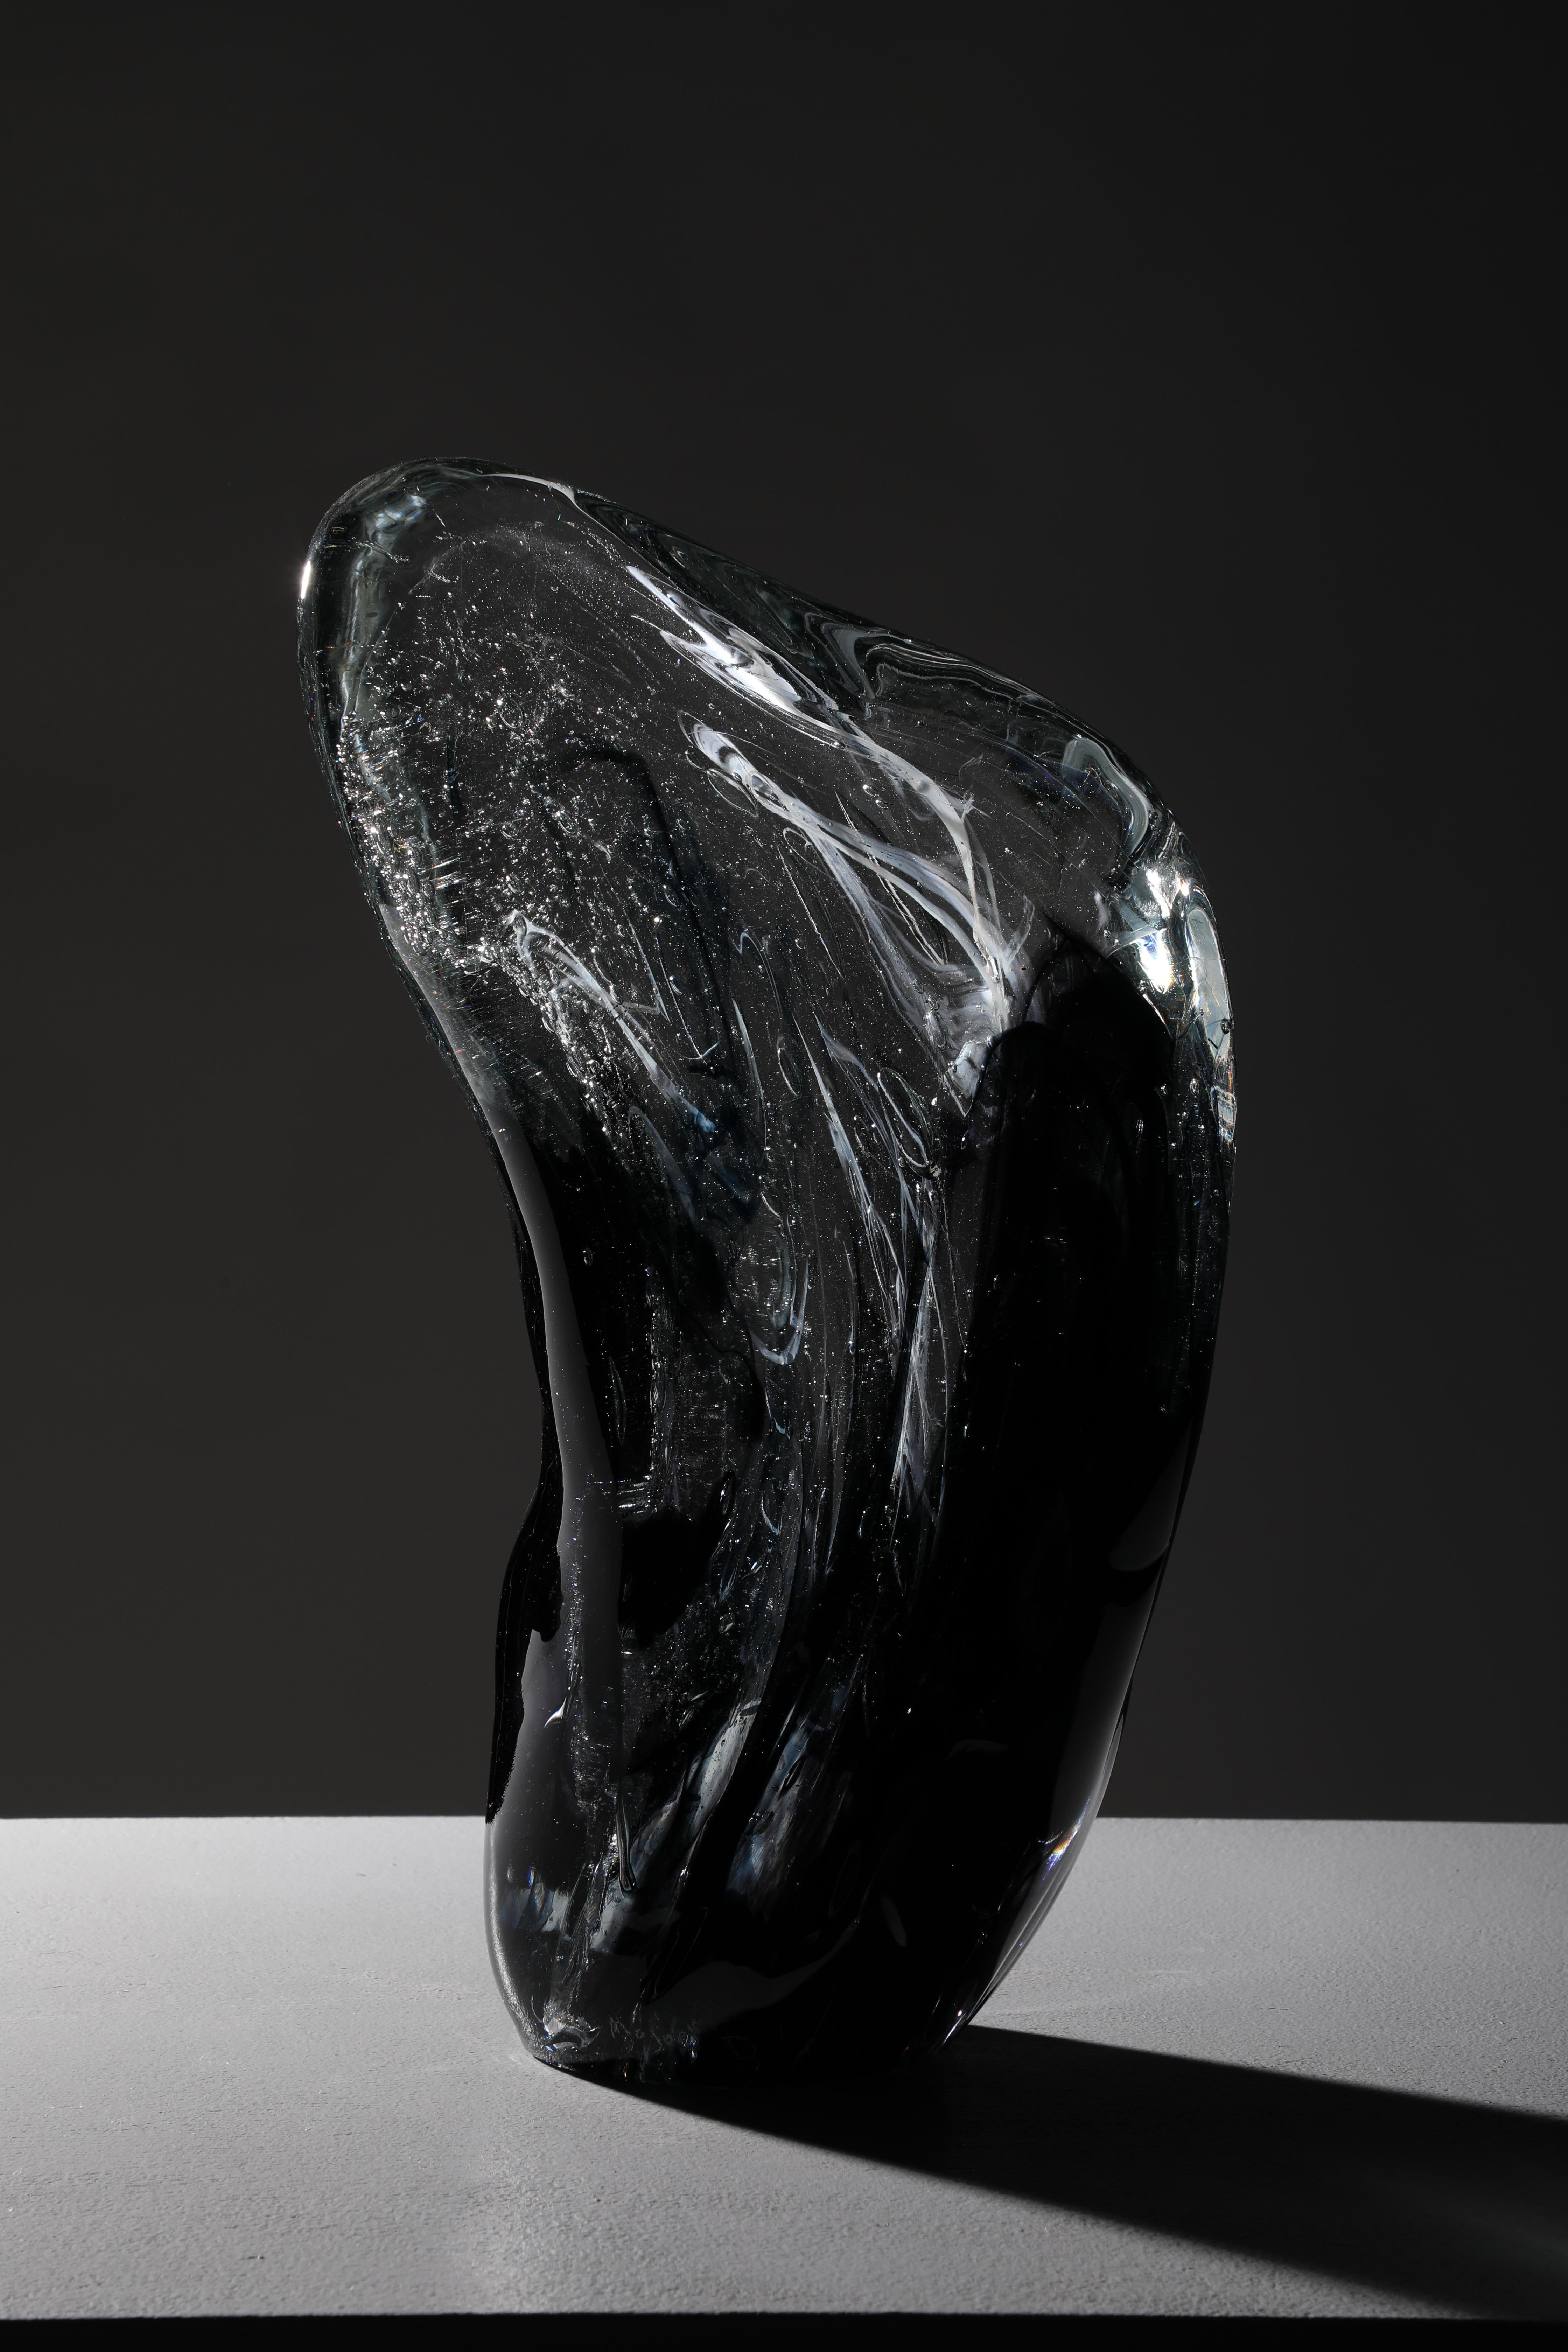 'Alcor' is a contemporary abstract cast glass sculpture by David Ruth from his Internal Space series. It is made by heating the glass and then hand working it into form. The main colors of black and dark blue contrasts the clear and white glass